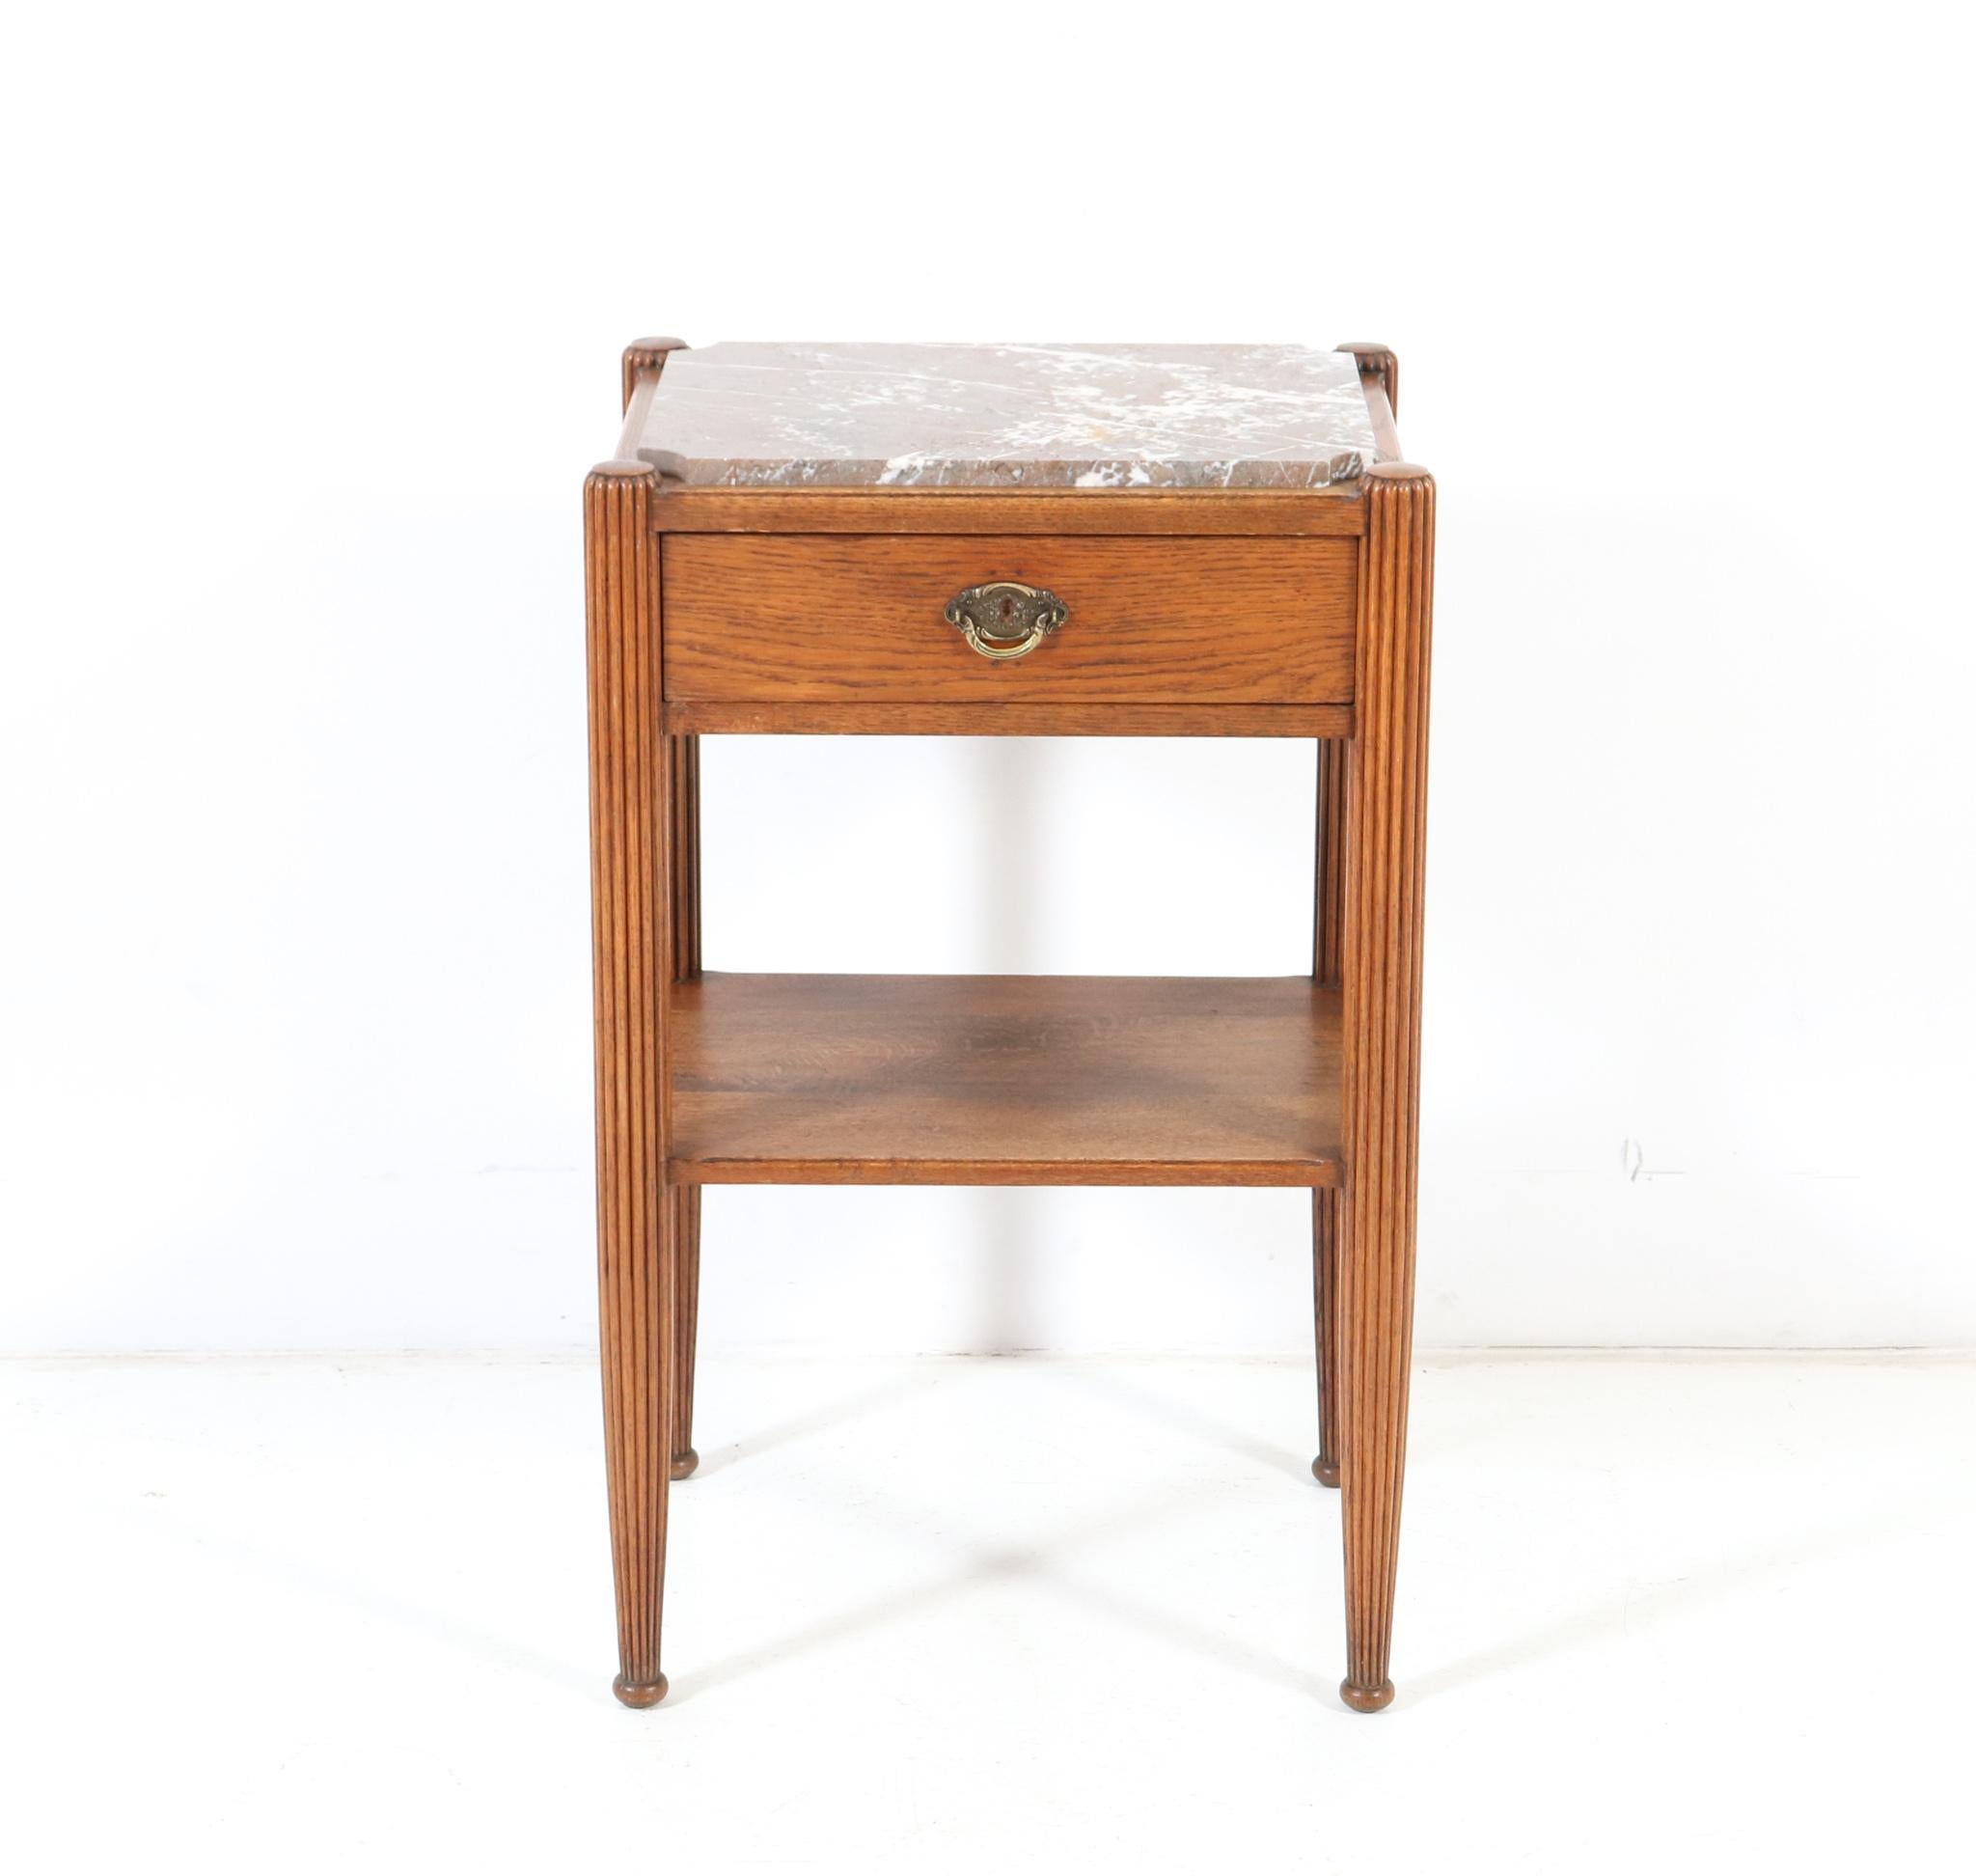 French Oak Art Deco Side Table with Marble Top, 1930s For Sale